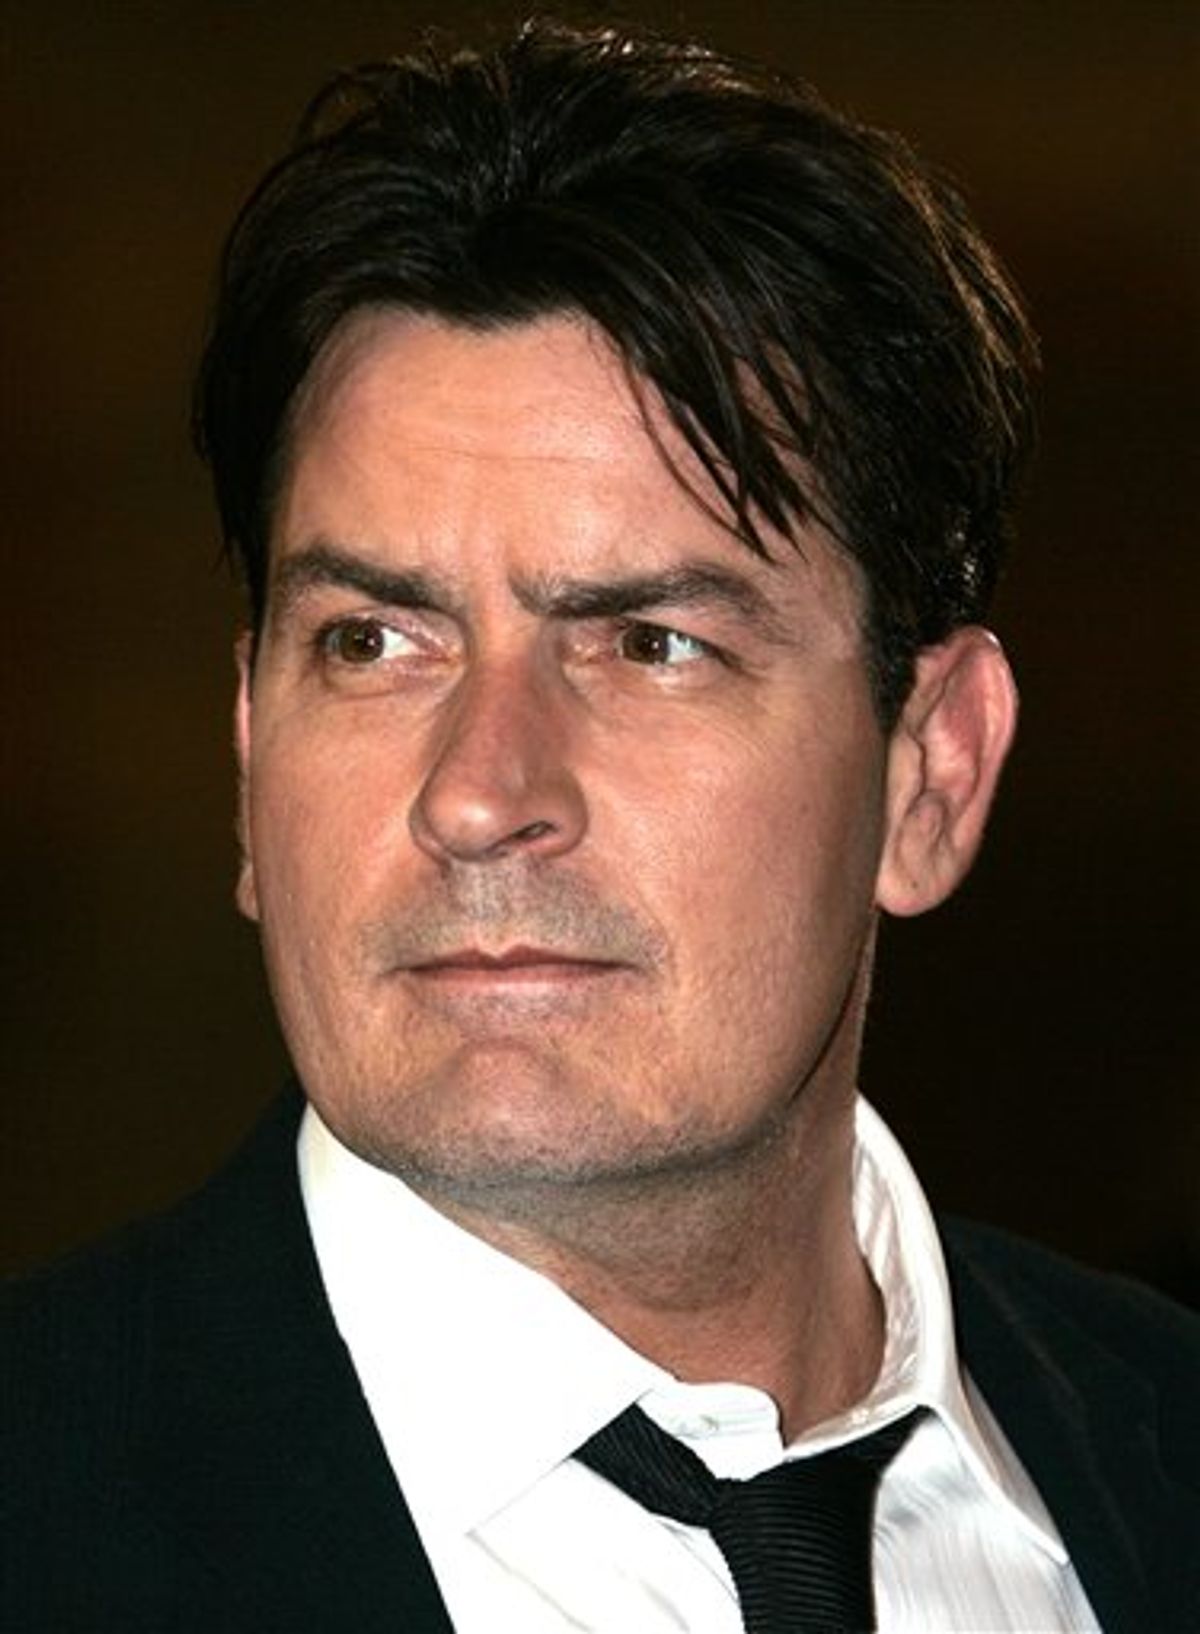 FILE - This May 21, 2006 file photo shows actor Charlie Sheen as he arrives for the screening of the film "Platoon,"at the 59th International Film Festival in Cannes, France. Los Angeles Superior Court Judge Allan Goodman ruled Wednesday, June 15, 2011, that Sheen's $100 million lawsuit over his firing from Two and a Half Men should be handled through private arbitration rather than in a public courtroom. (AP Photo/Kirsty Wigglesworth, File) (AP)